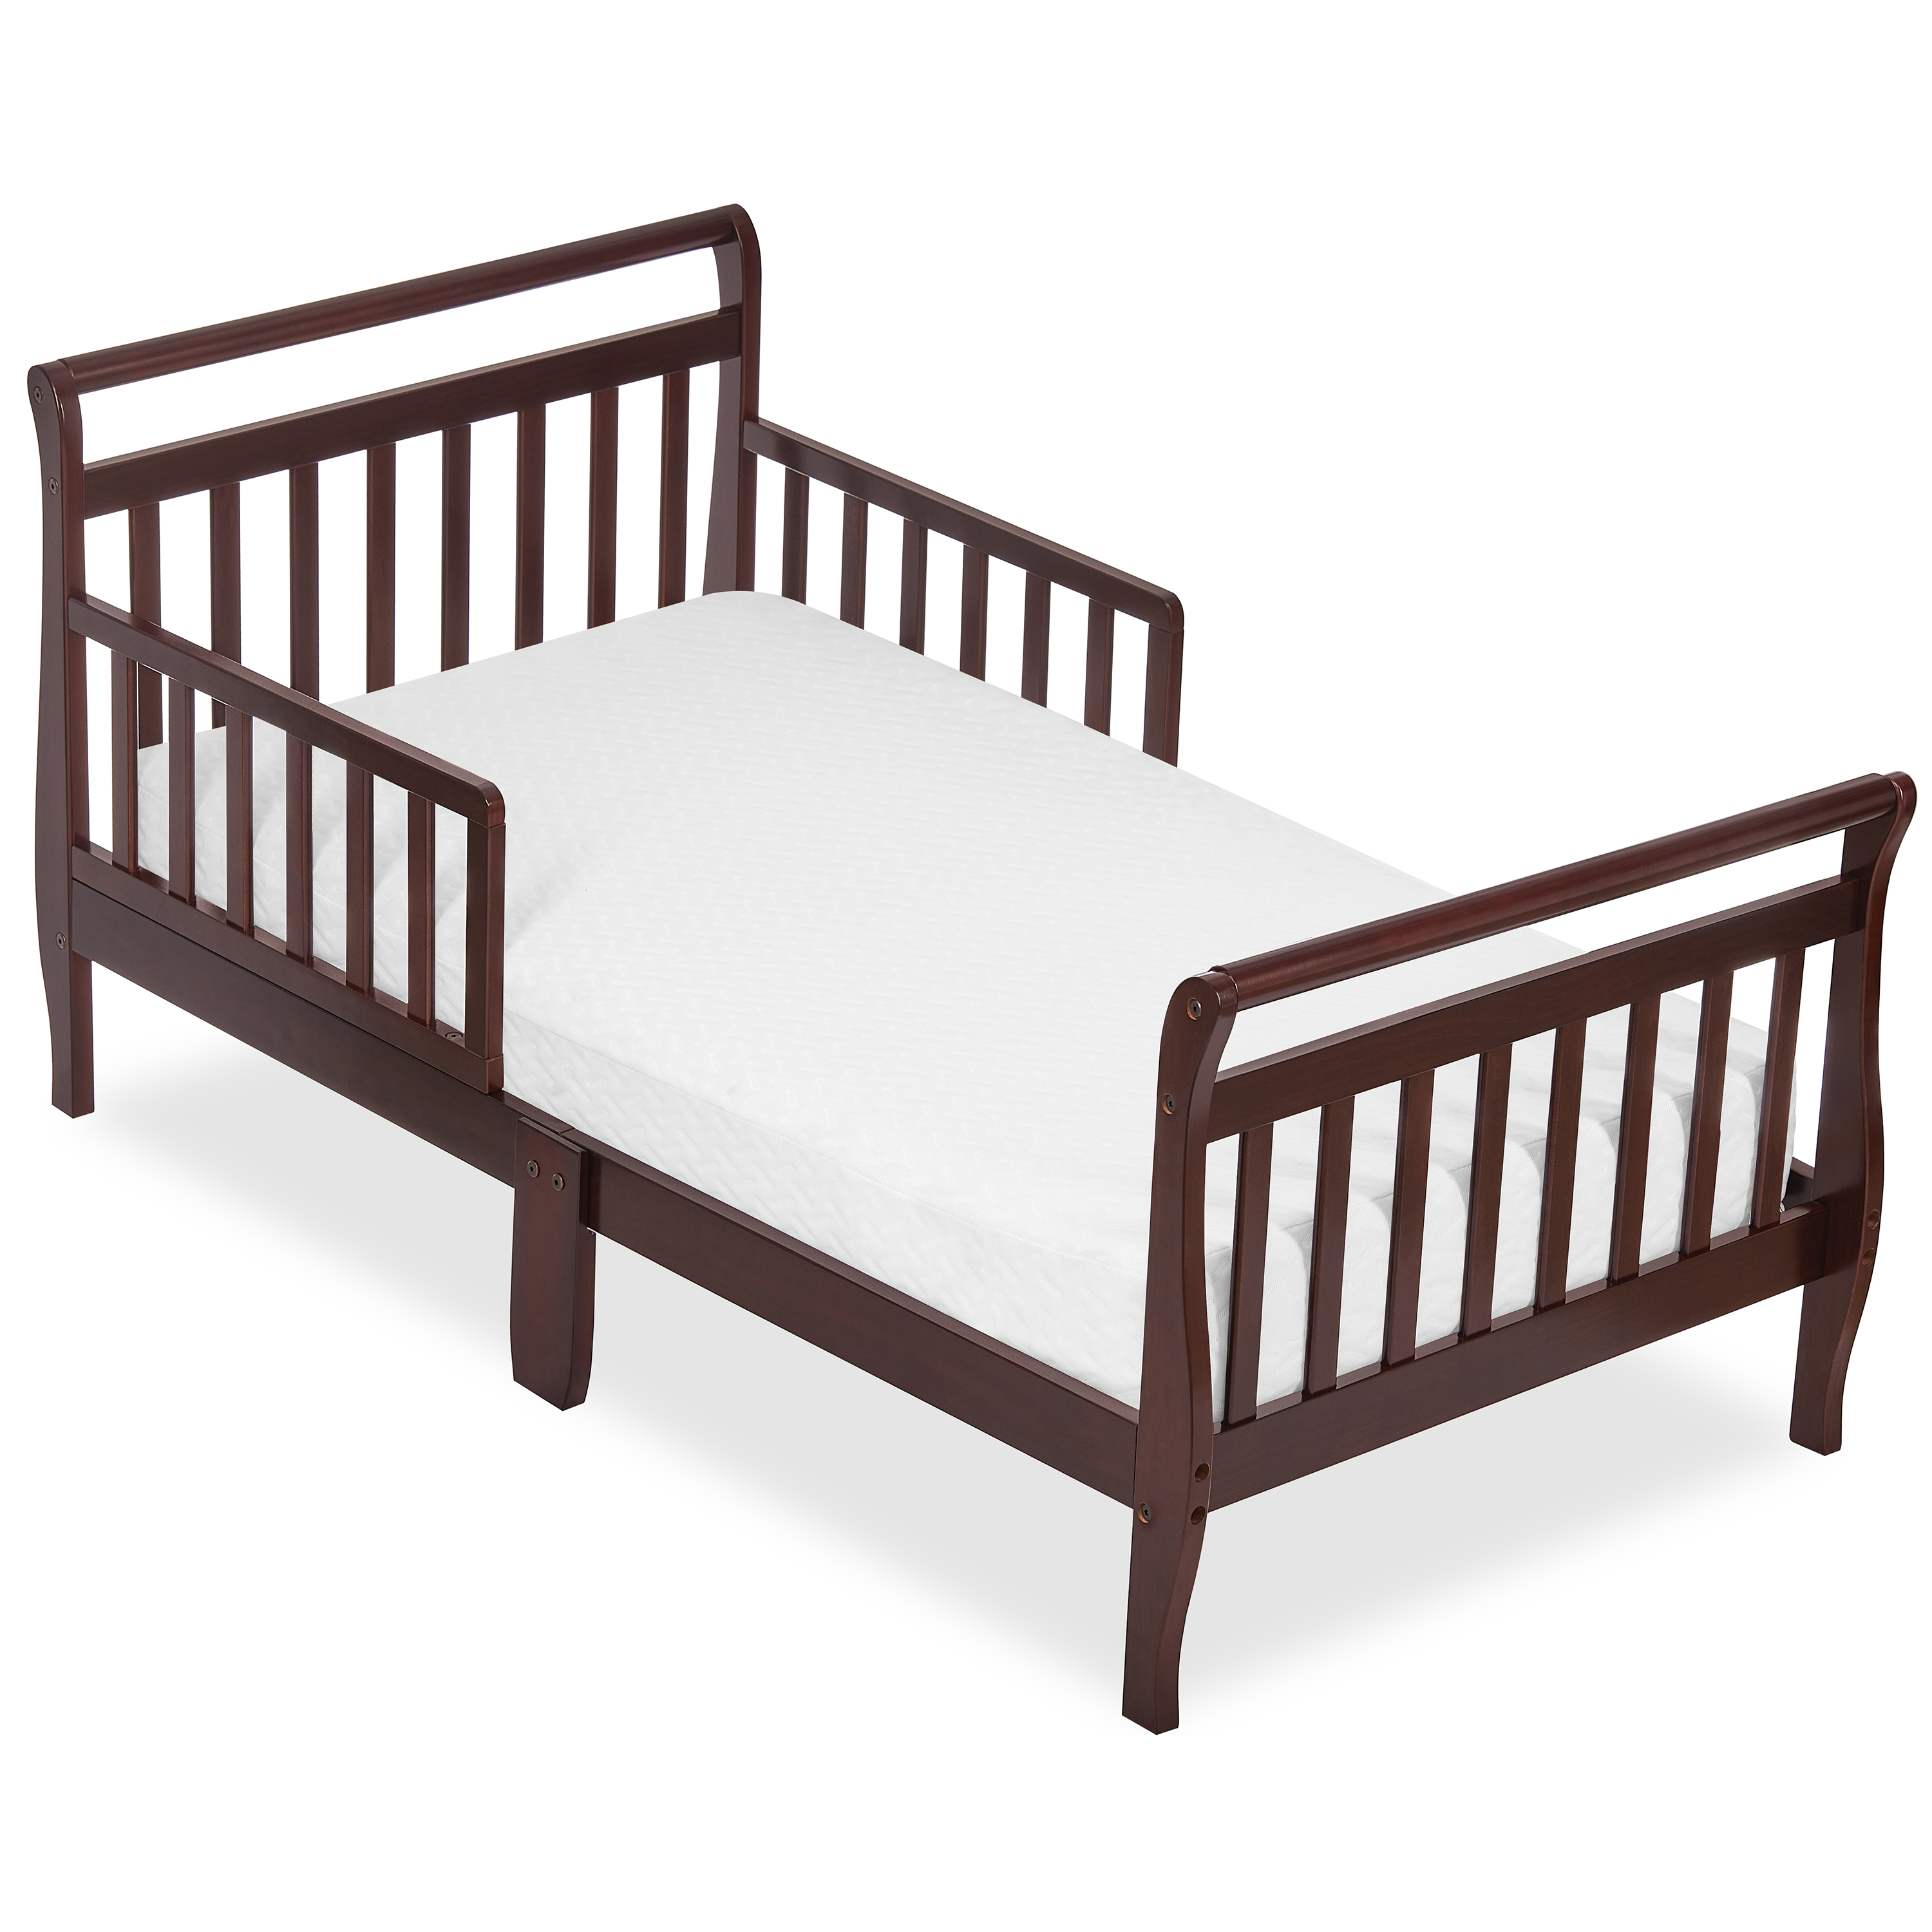 Dream On Me, Sleigh Toddler Bed, Cherry, Model #642-C - image 1 of 14